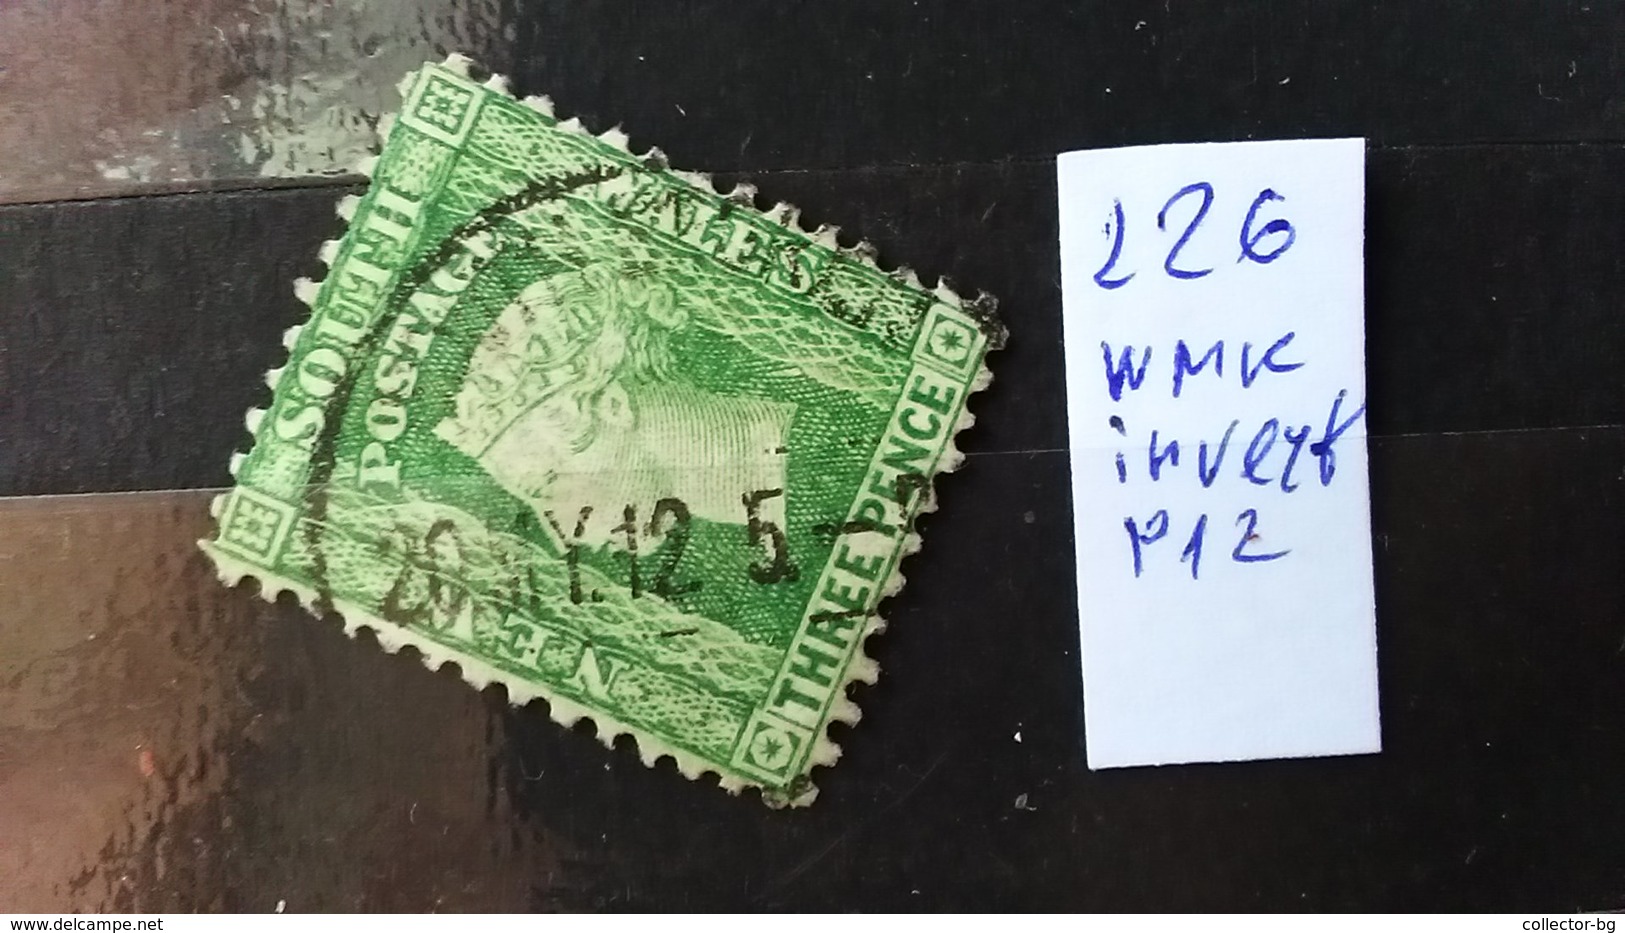 RRR RARE 3 THREE PENCE GREEN NEW SOUTH WALES AUSTRALIA QUEEN VICTORIA ERROR WMK INVERT 226 P12 NO SEE OTHER STAMP TIMBRE - Mint Stamps